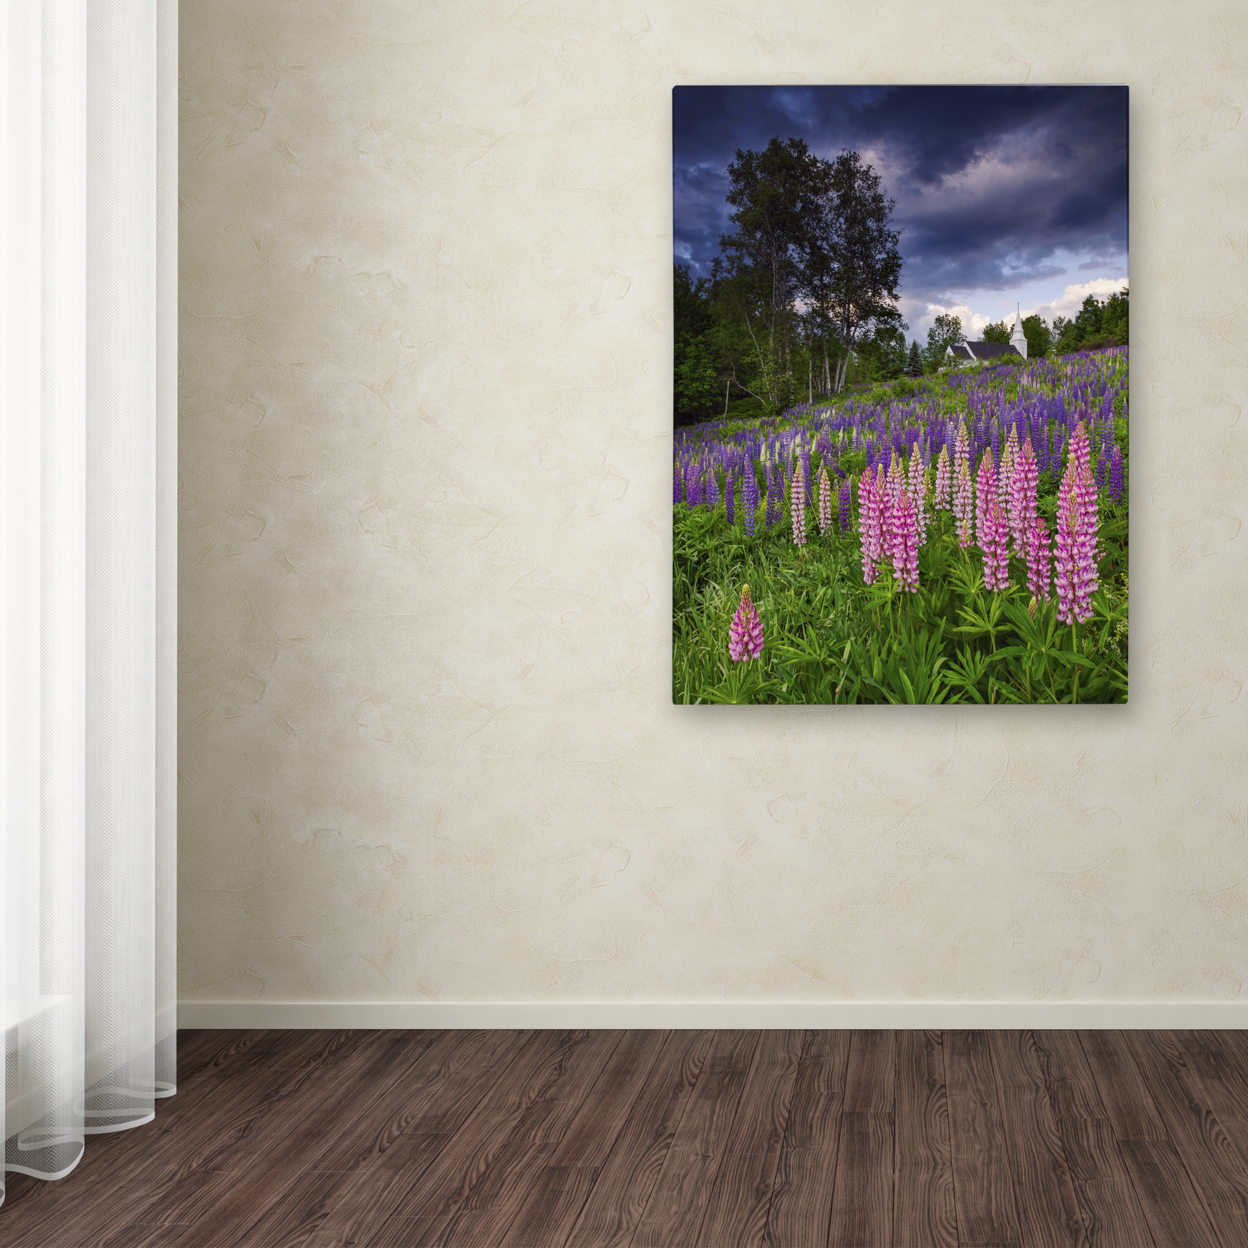 Michael Blanchette Photography 'Lupines On The Hill' Canvas Art 18 X 24